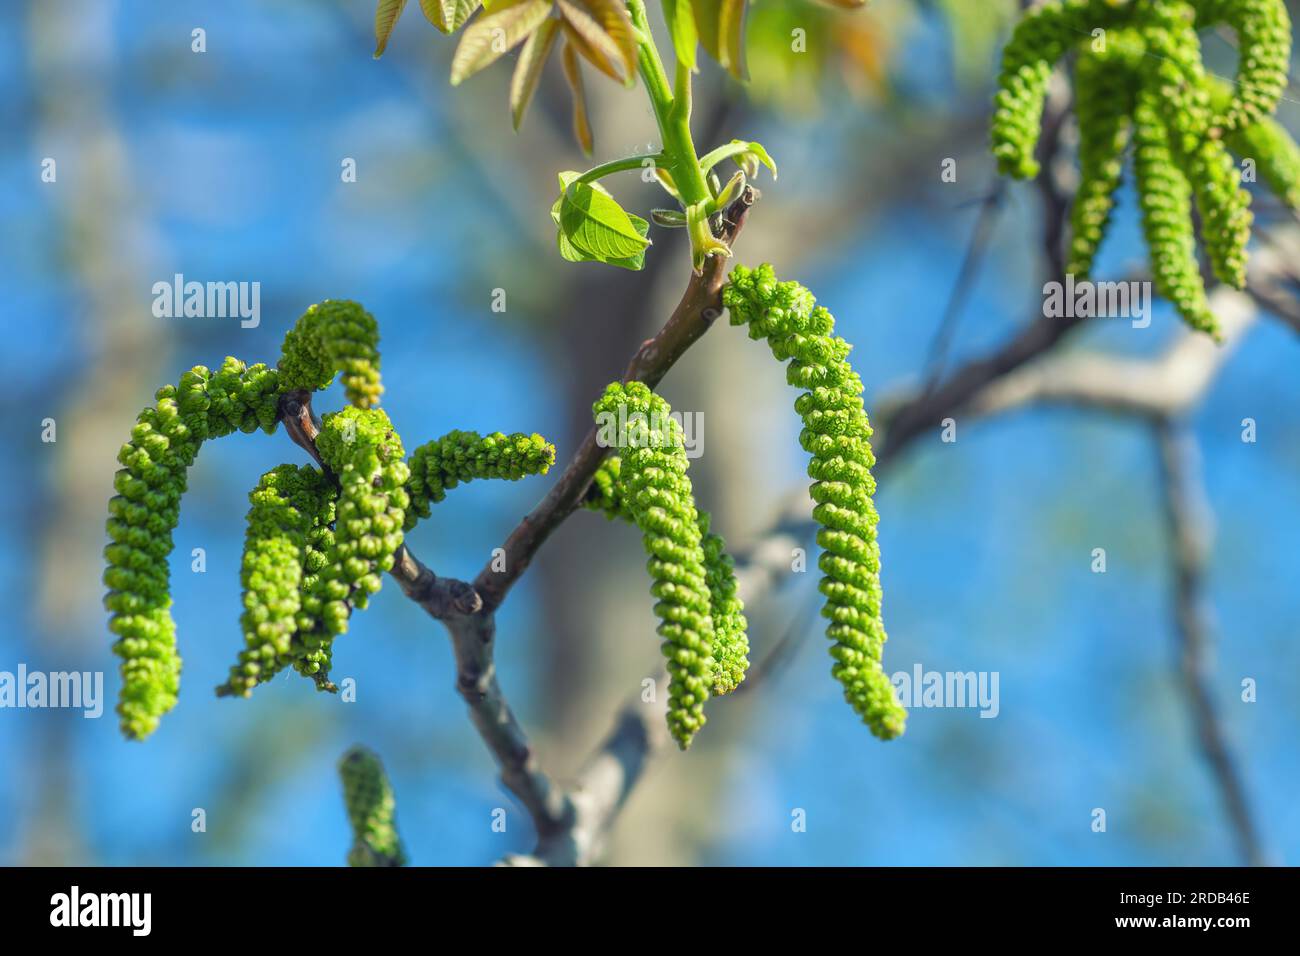 Walnuts blossoms tree in spring light garden close up. Closeup Juglans regia blooming branch by blurred blue sky background. Male flowers, young red l Stock Photo